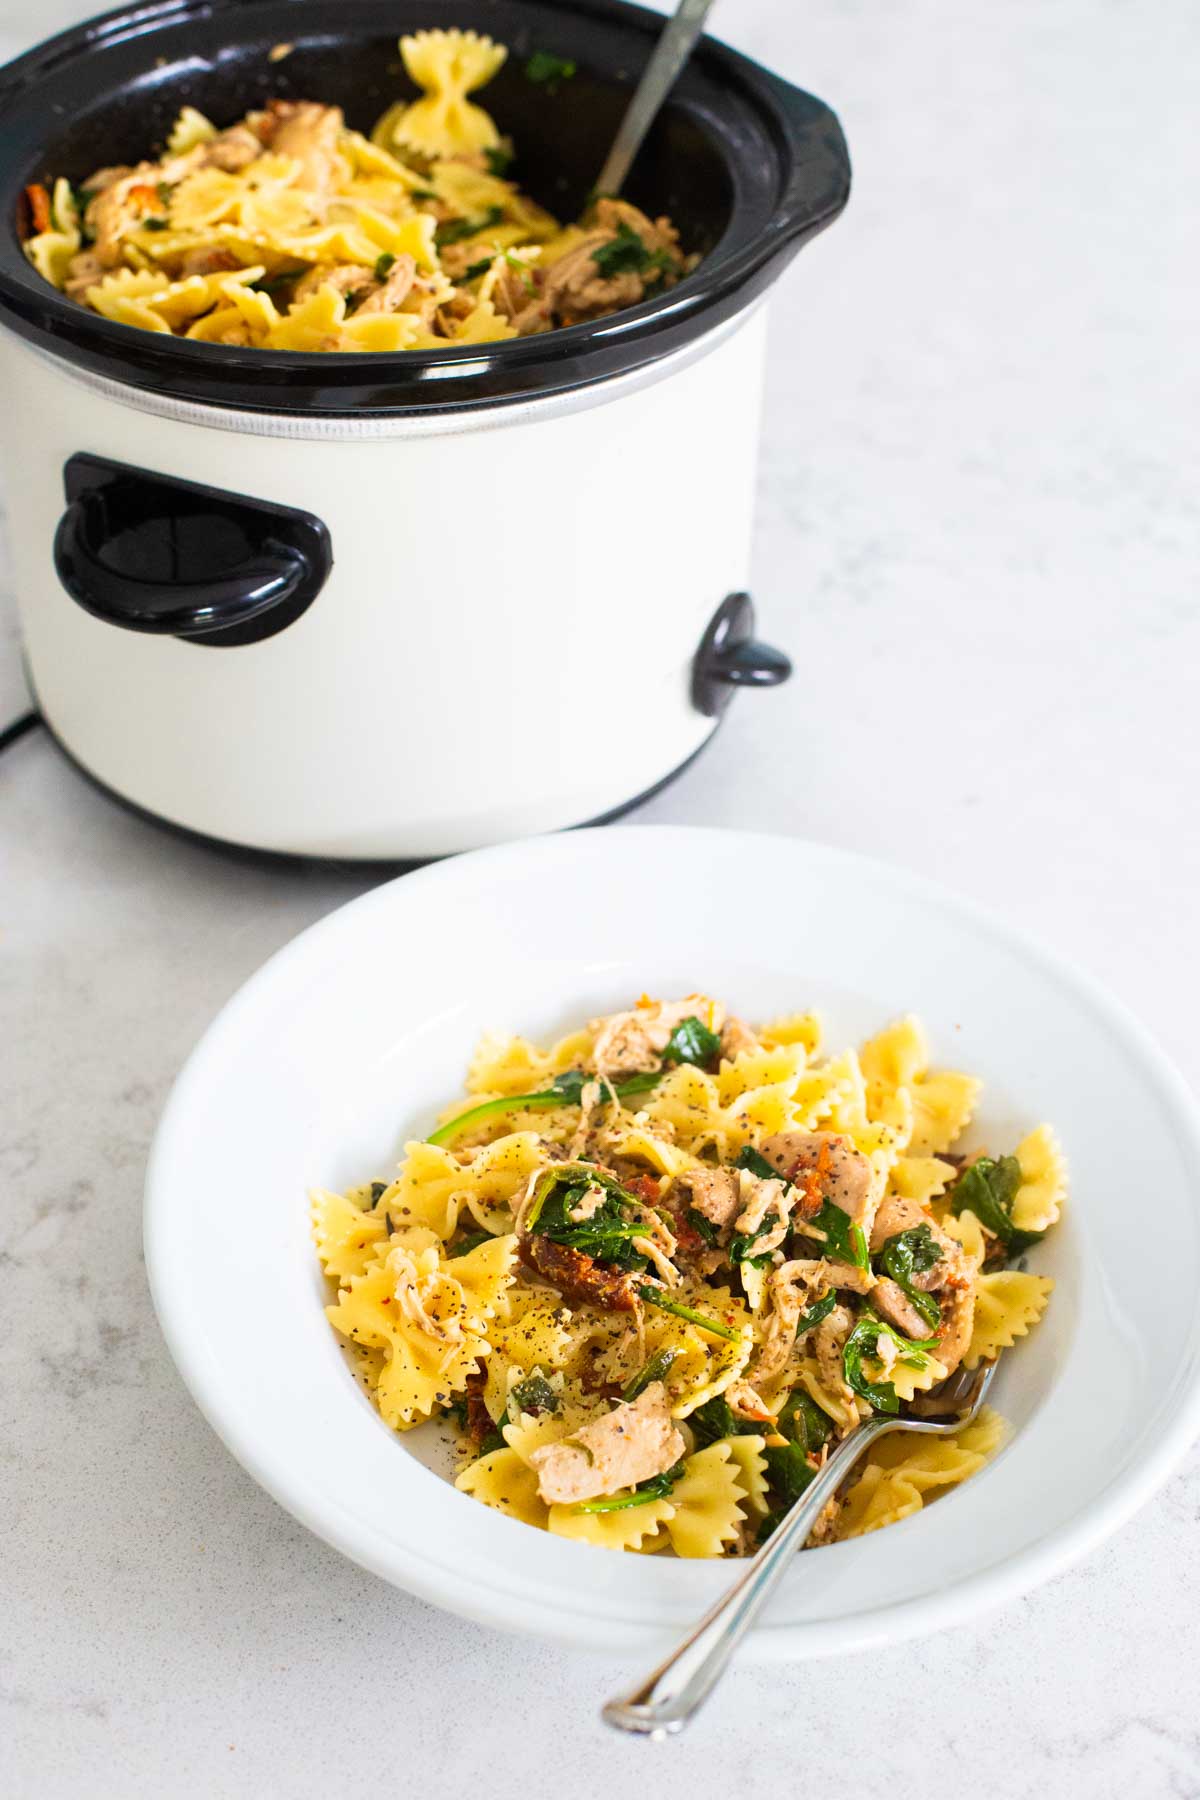 A serving of the Tuscan chicken pasta sits on the counter in front of the CrockPot that cooked it.